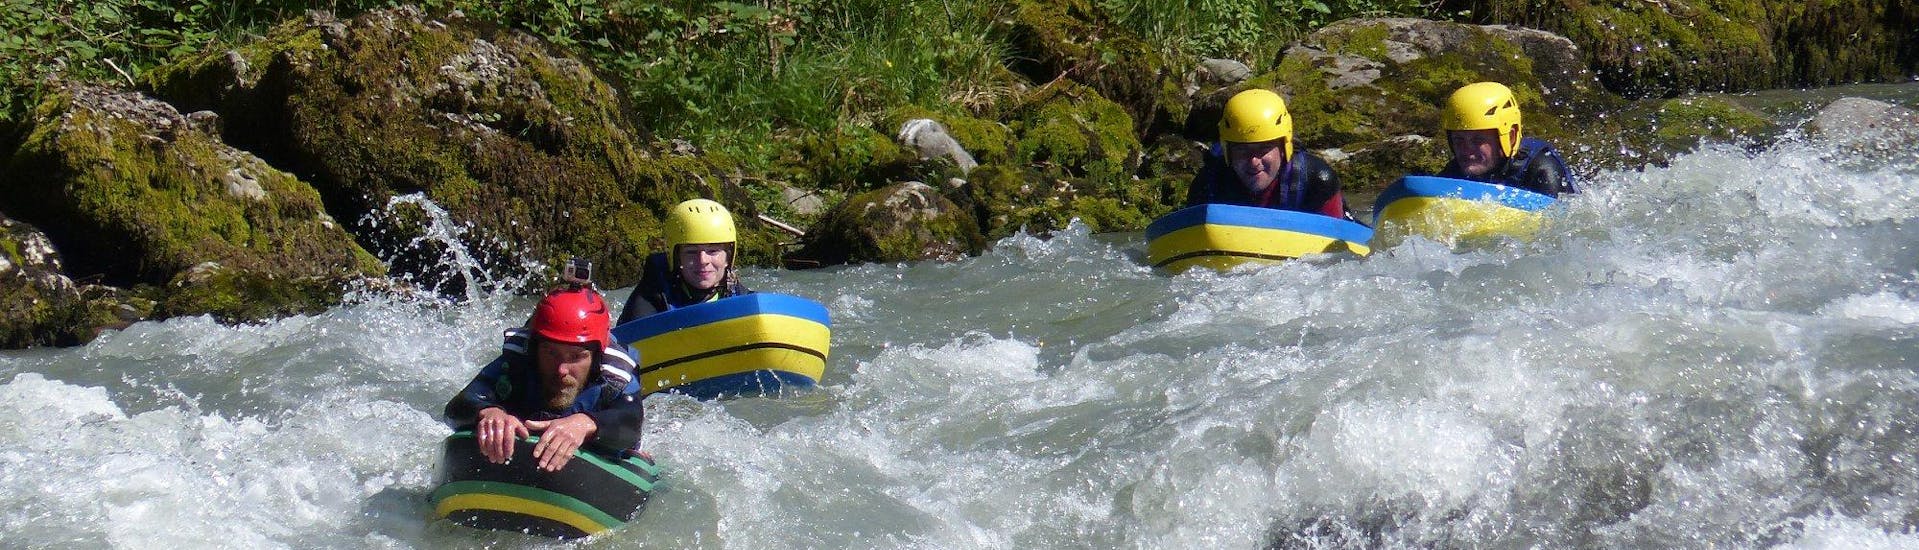 A group is enjoying their Hydrospeed on Dranse River - Discovery activity operated by AN Rafting Haute-Savoie.